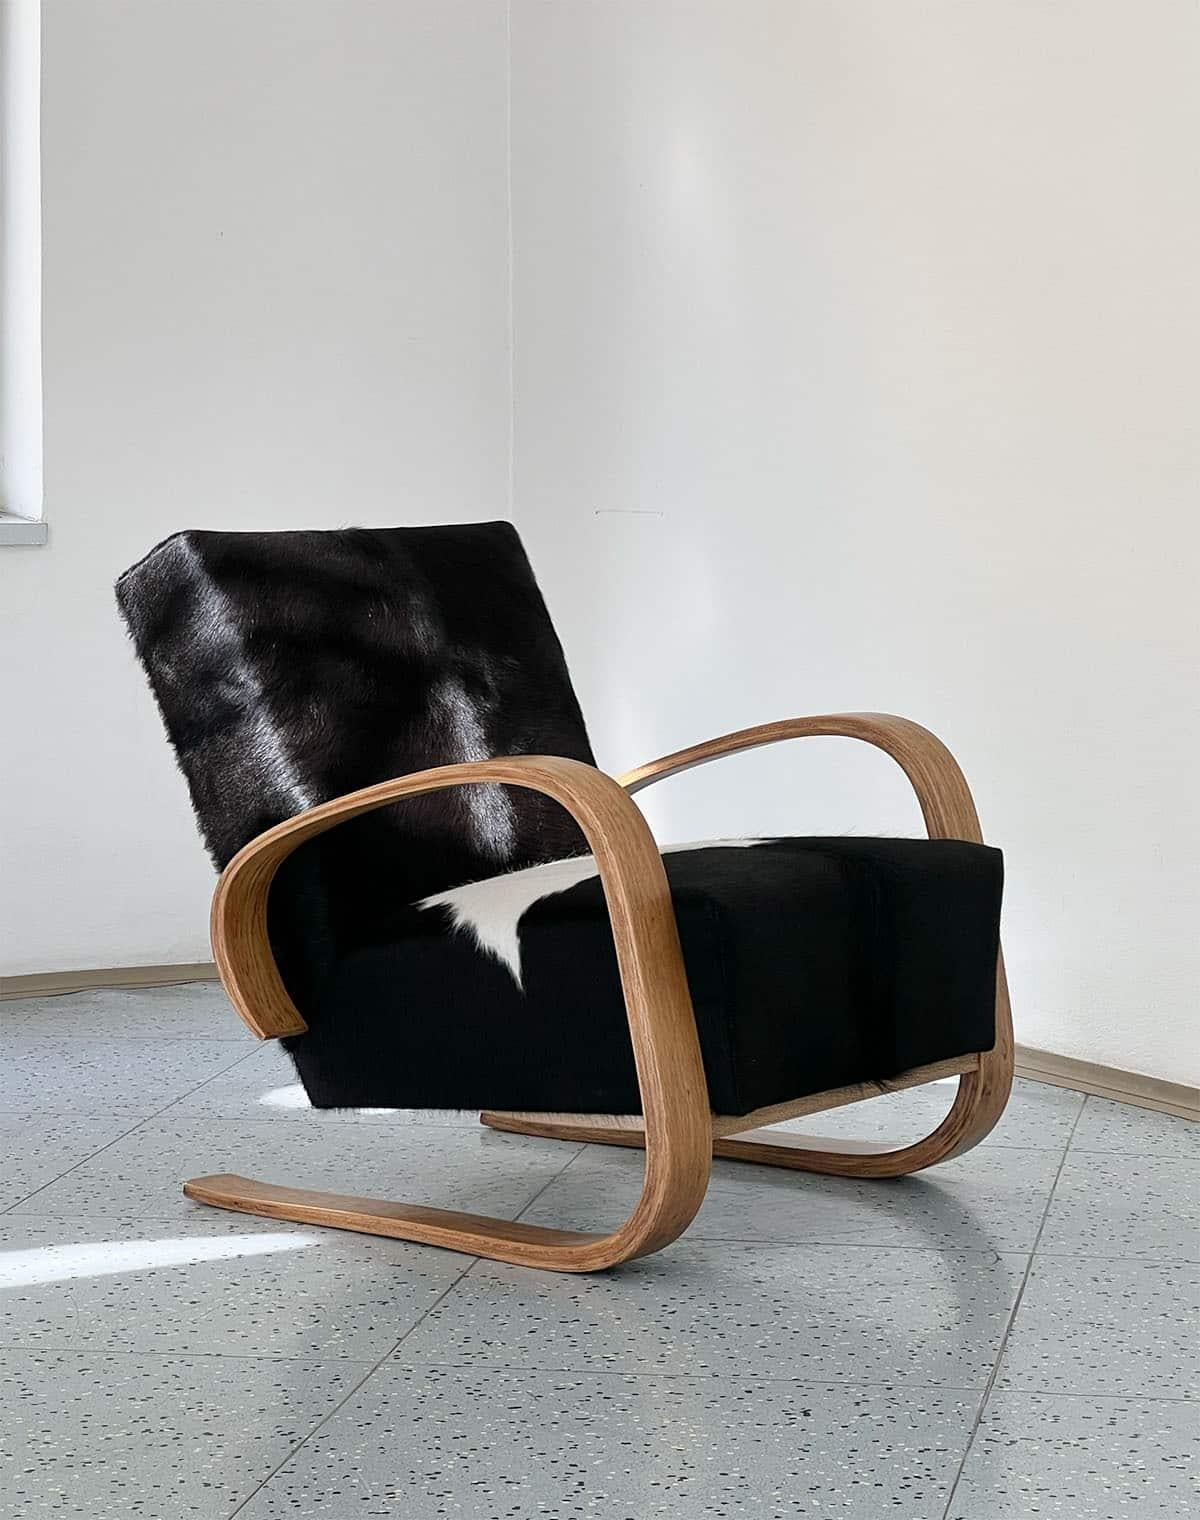 Cantilever lounge chair designed by Miroslav Navrátil for Spojené UP závody in Czechoslovakia, 1950s.

This lounge chair was designed by Miroslav Navratil and is reupholstered in this beautiful cowhide. The colors of the upholstery together with